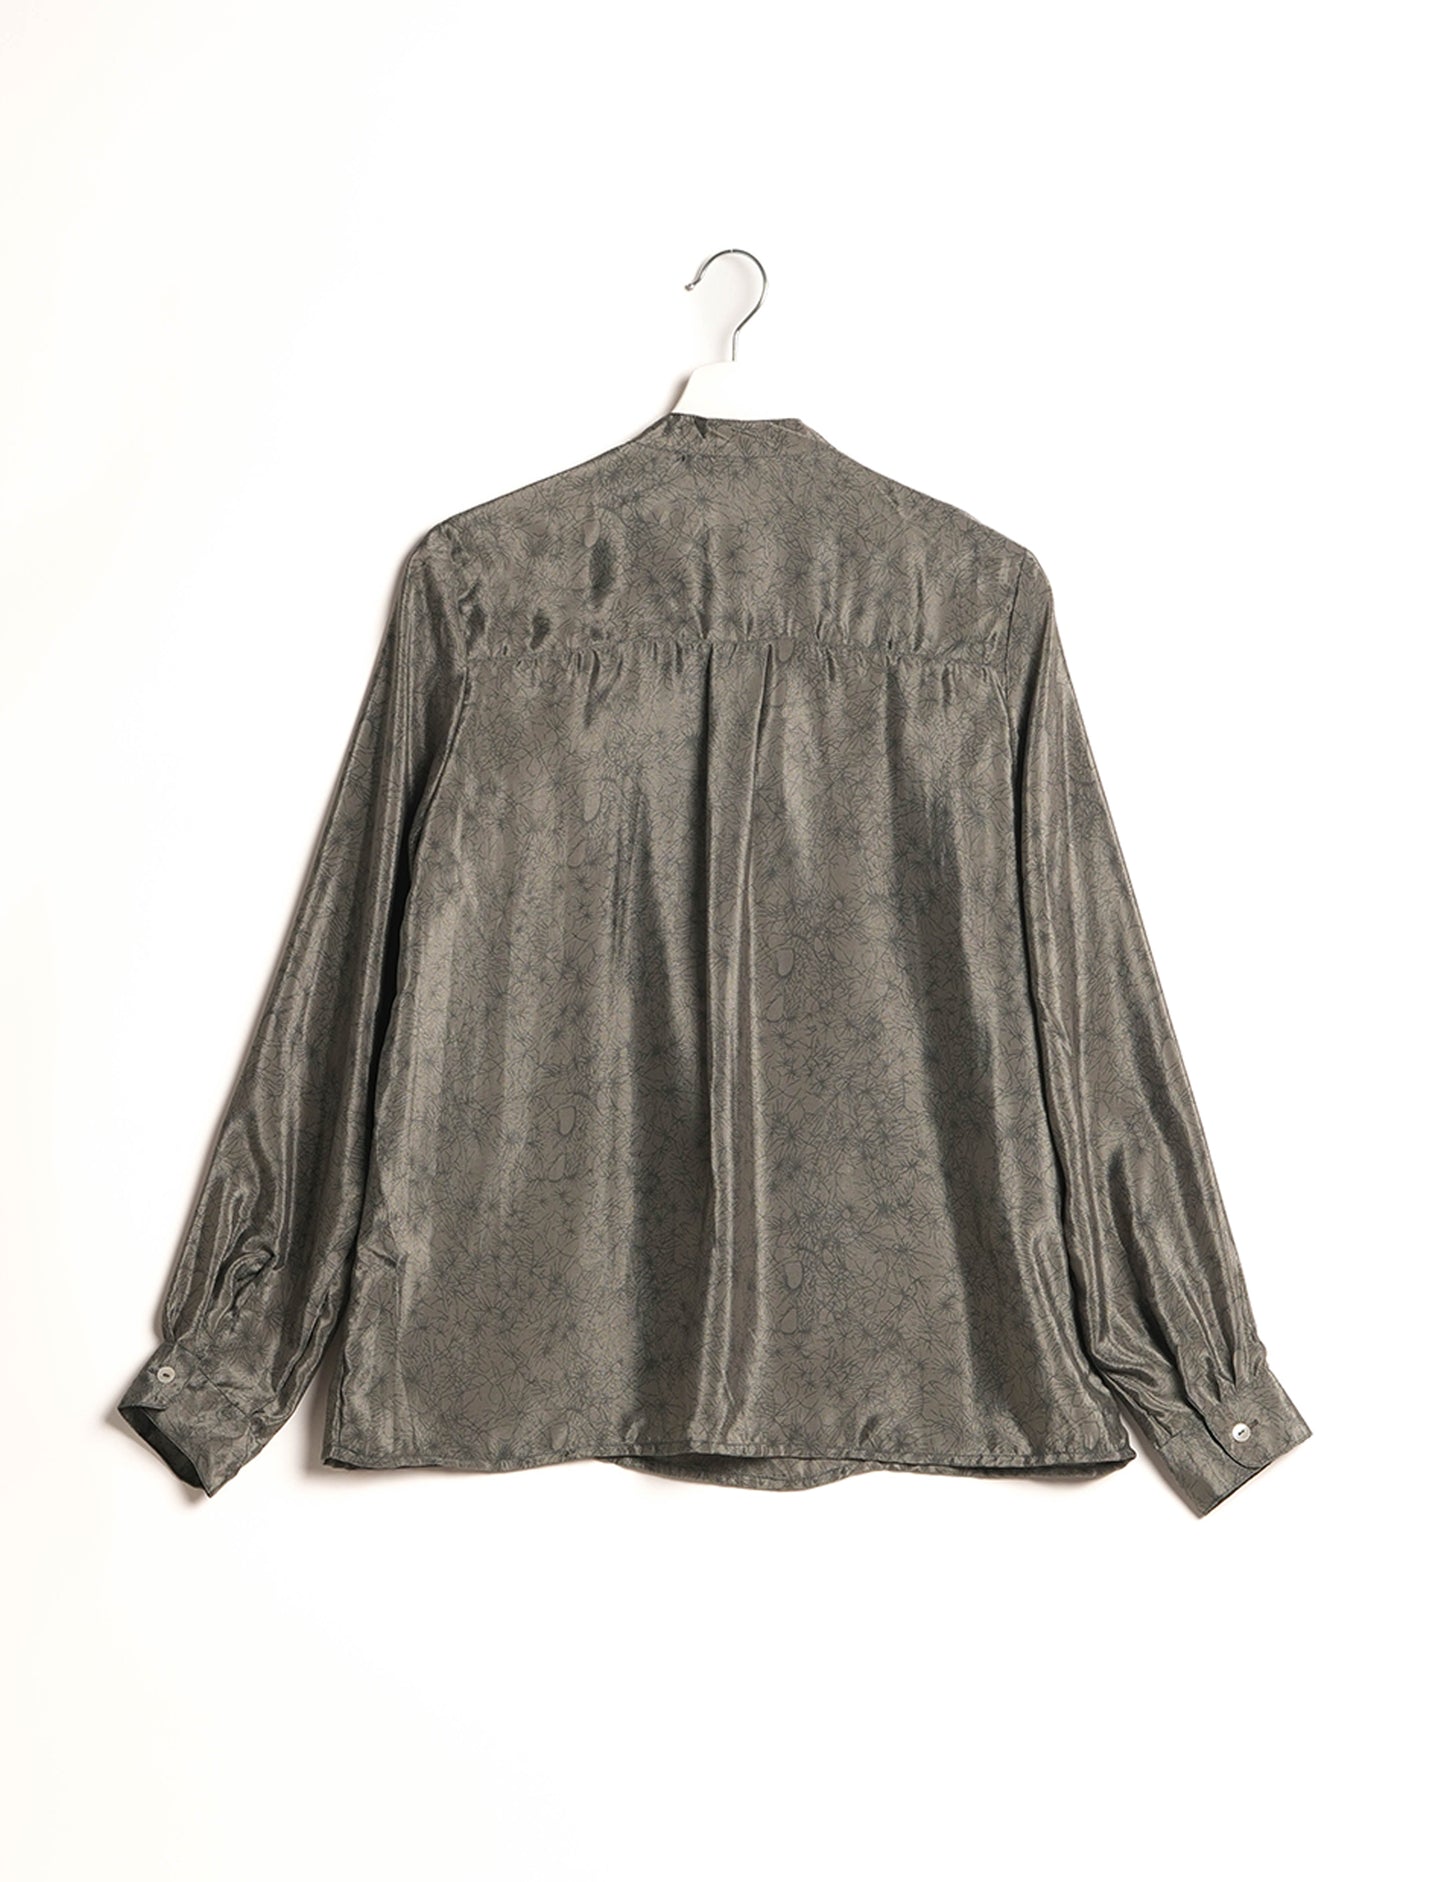 Versatile DAY BLOUSE, a sustainable wardrobe essential with a classic Johnny collar and full sleeves. Lightweight fabric for a comfortable fit, perfect for dressing up or down. Explore ethical clothing and green fashion with this eco-friendly and timeless piece, perfect for any occasion.